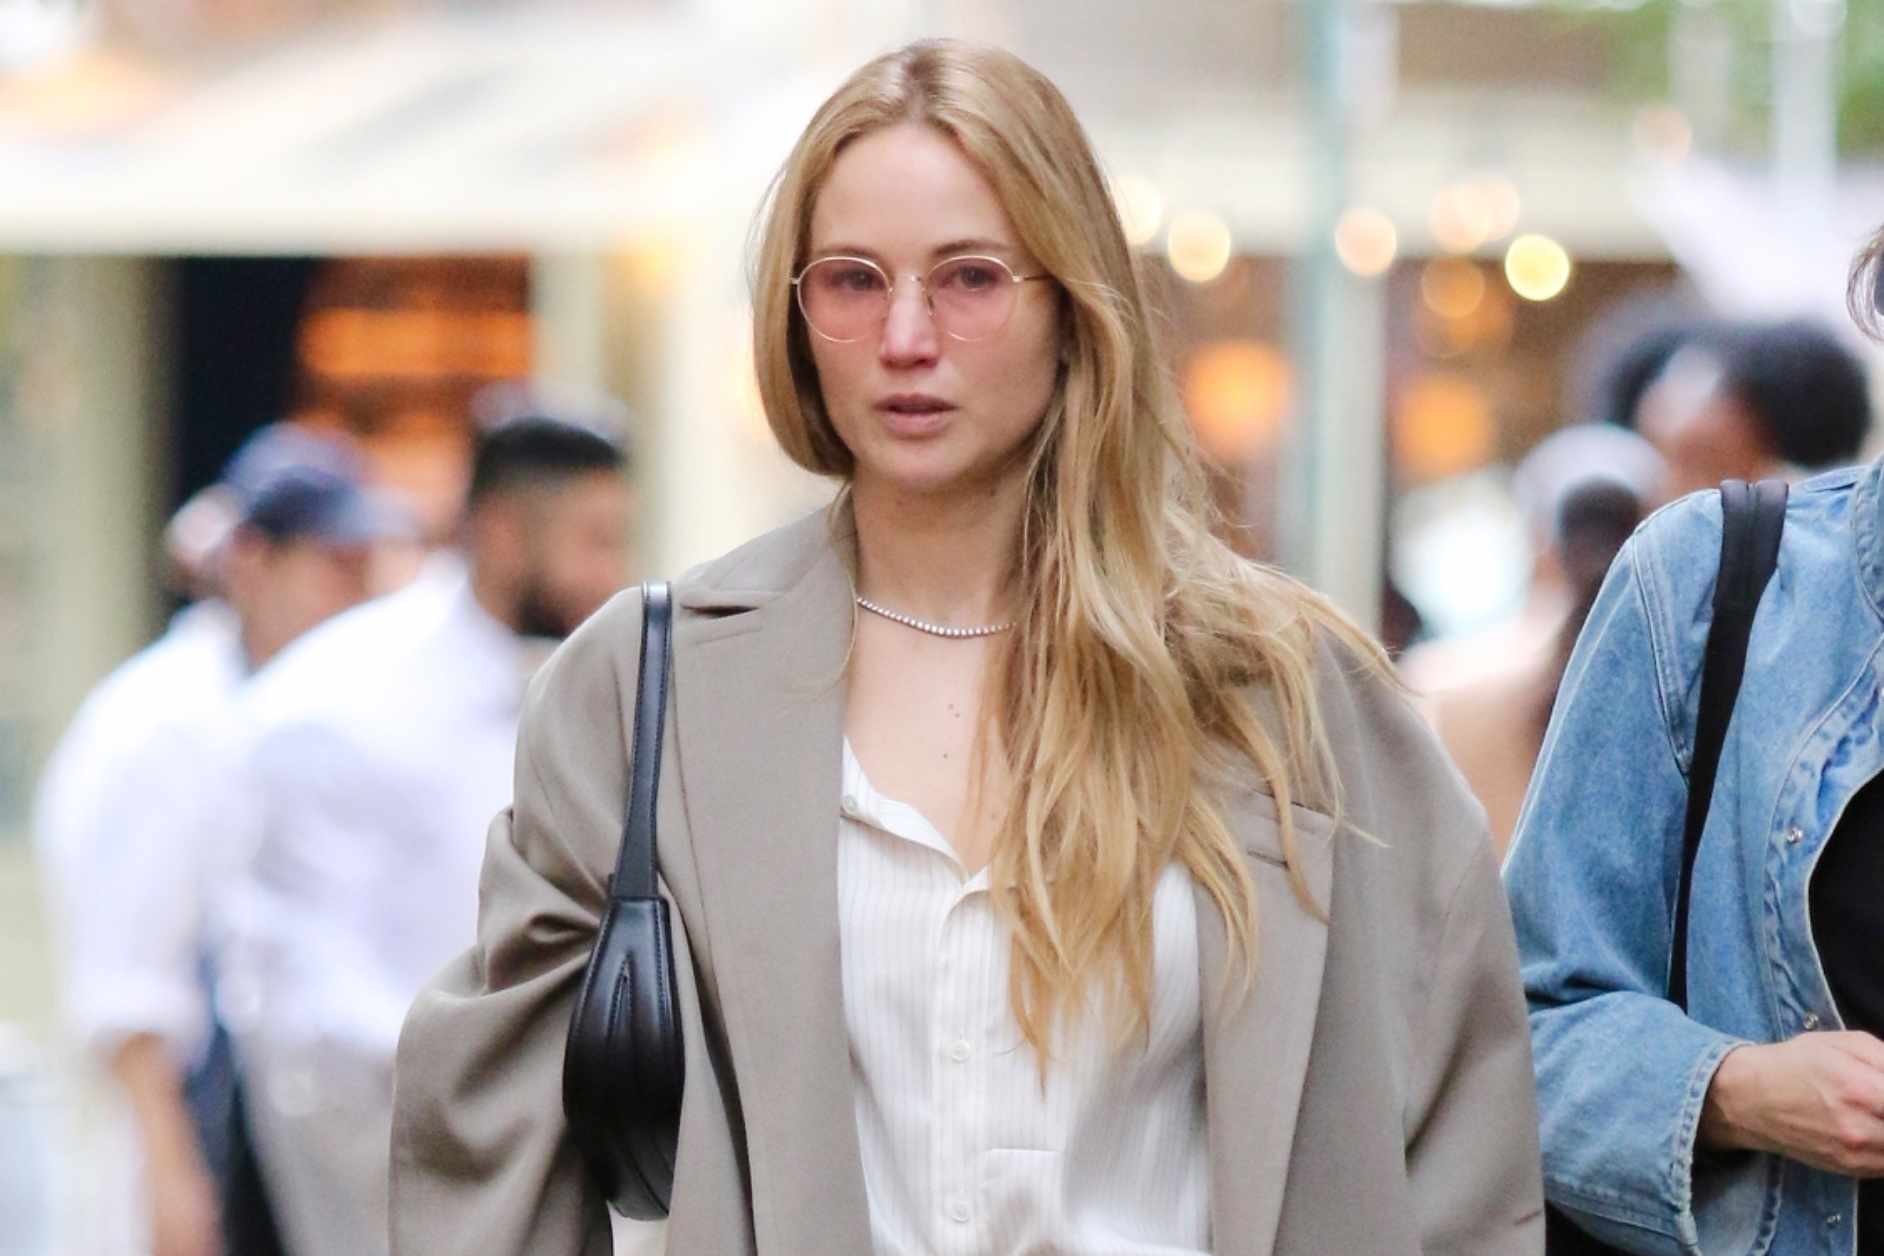 Actress Jennifer Lawrence is seen wearing sunglasses, a beige coat, white shirt, baggy tan pants, and black leather slip-on shoes while walking with Phoebe Waller-Bridge